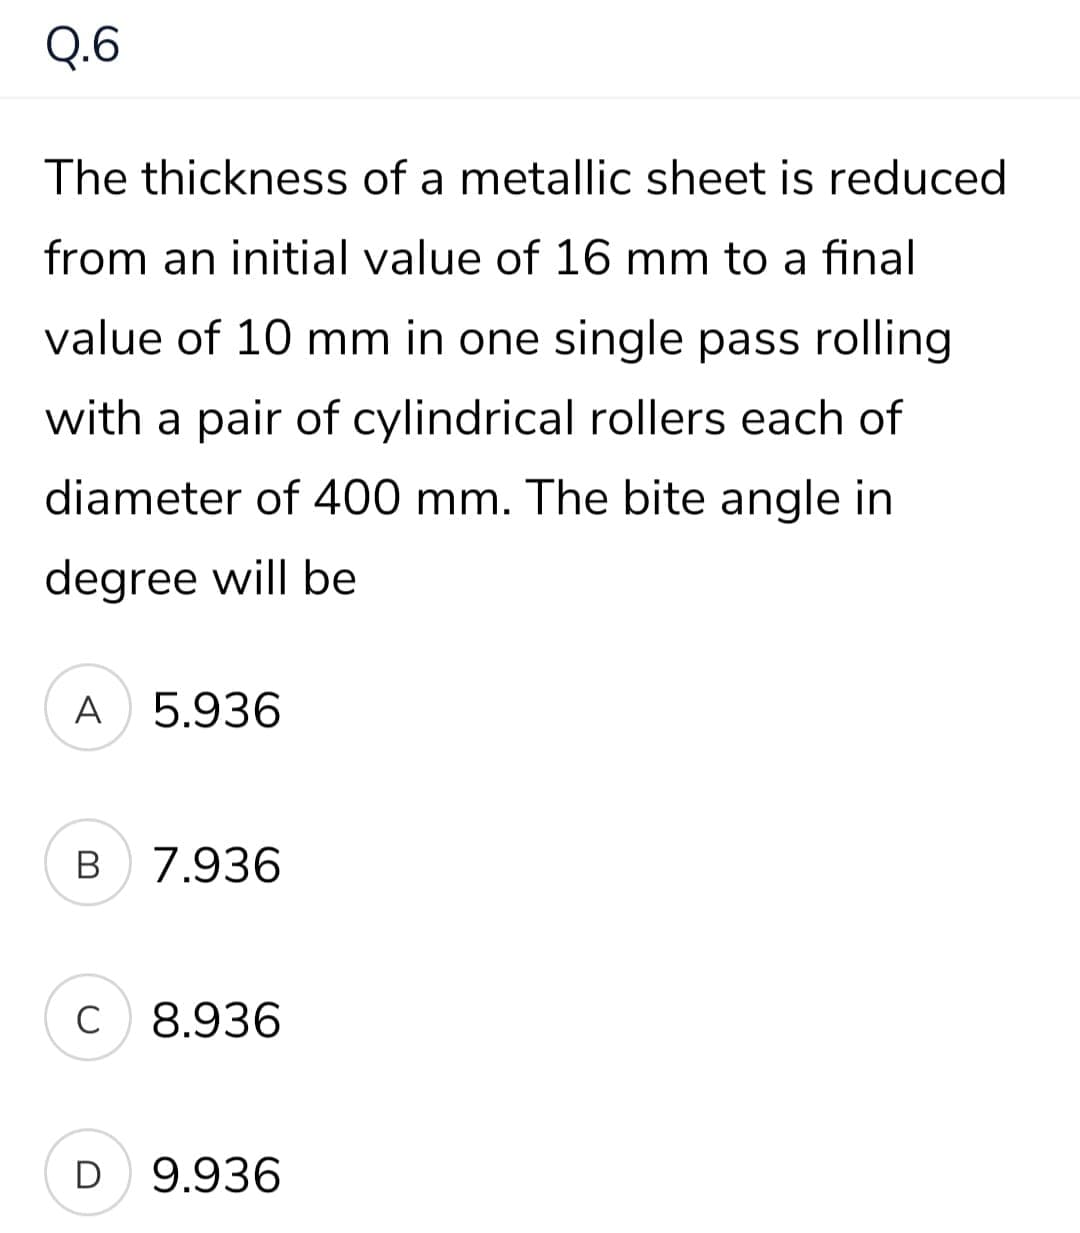 Q.6
The thickness of a metallic sheet is reduced
from an initial value of 16 mm to a final
value of 10 mm in one single pass rolling
with a pair of cylindrical rollers each of
diameter of 400 mm. The bite angle in
degree will be
A
5.936
В
7.936
C
8.936
D
9.936
